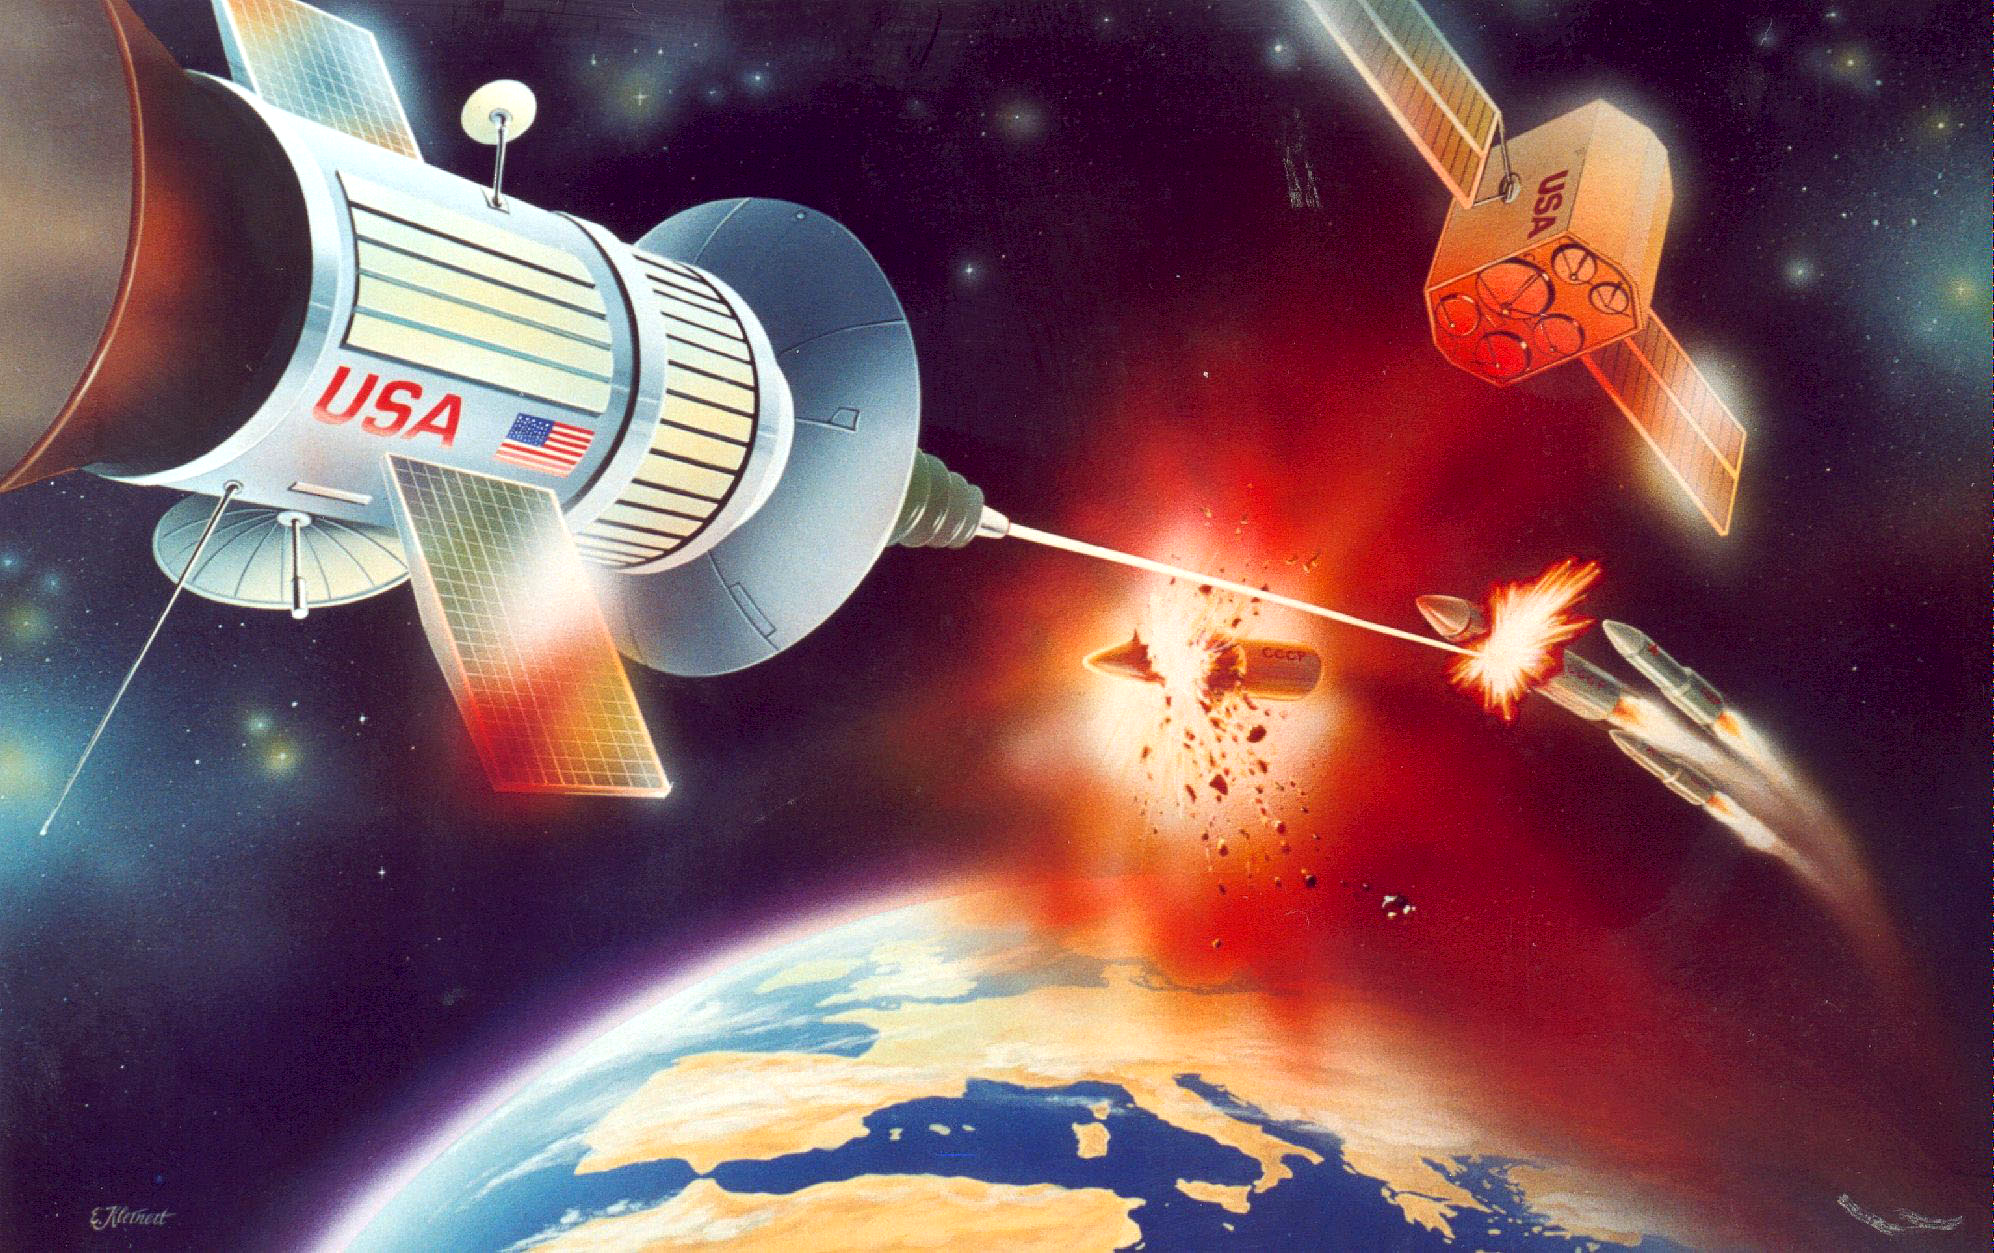 It's going to happen': is the world ready for war in space